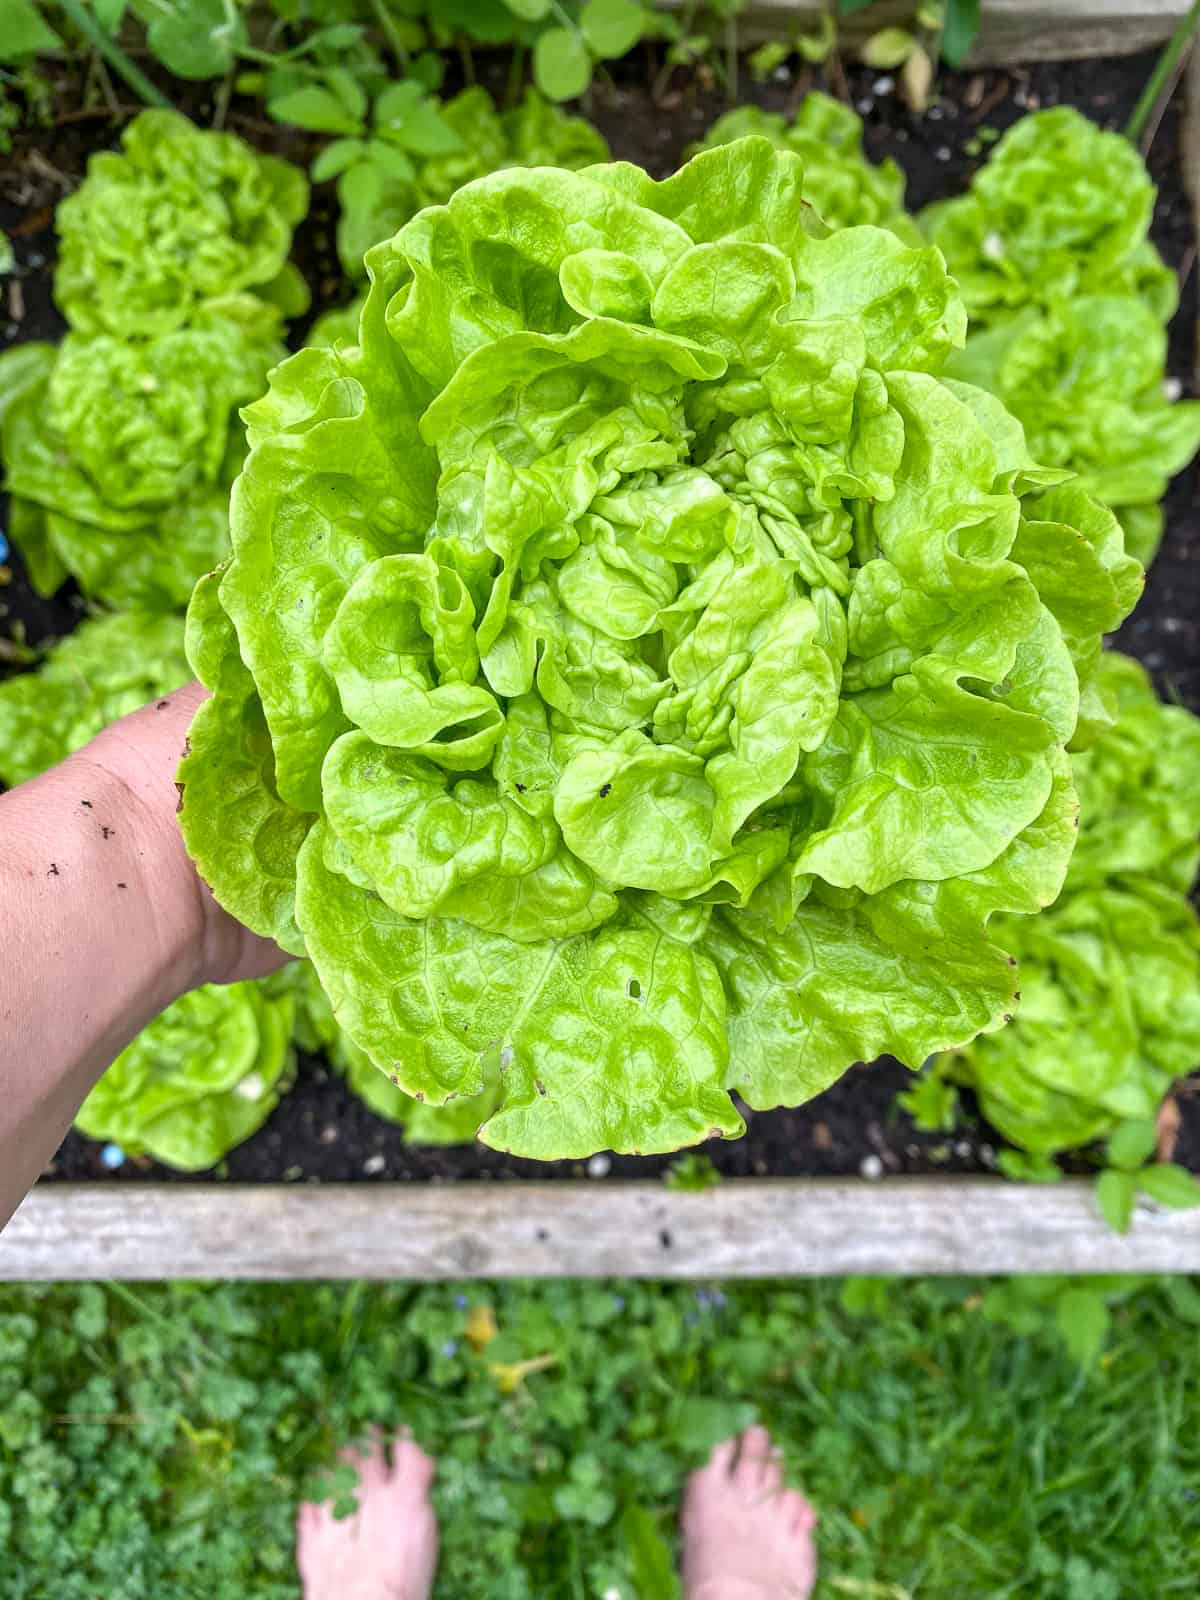 A woman's hand holding a lettuce that she has just harvested.